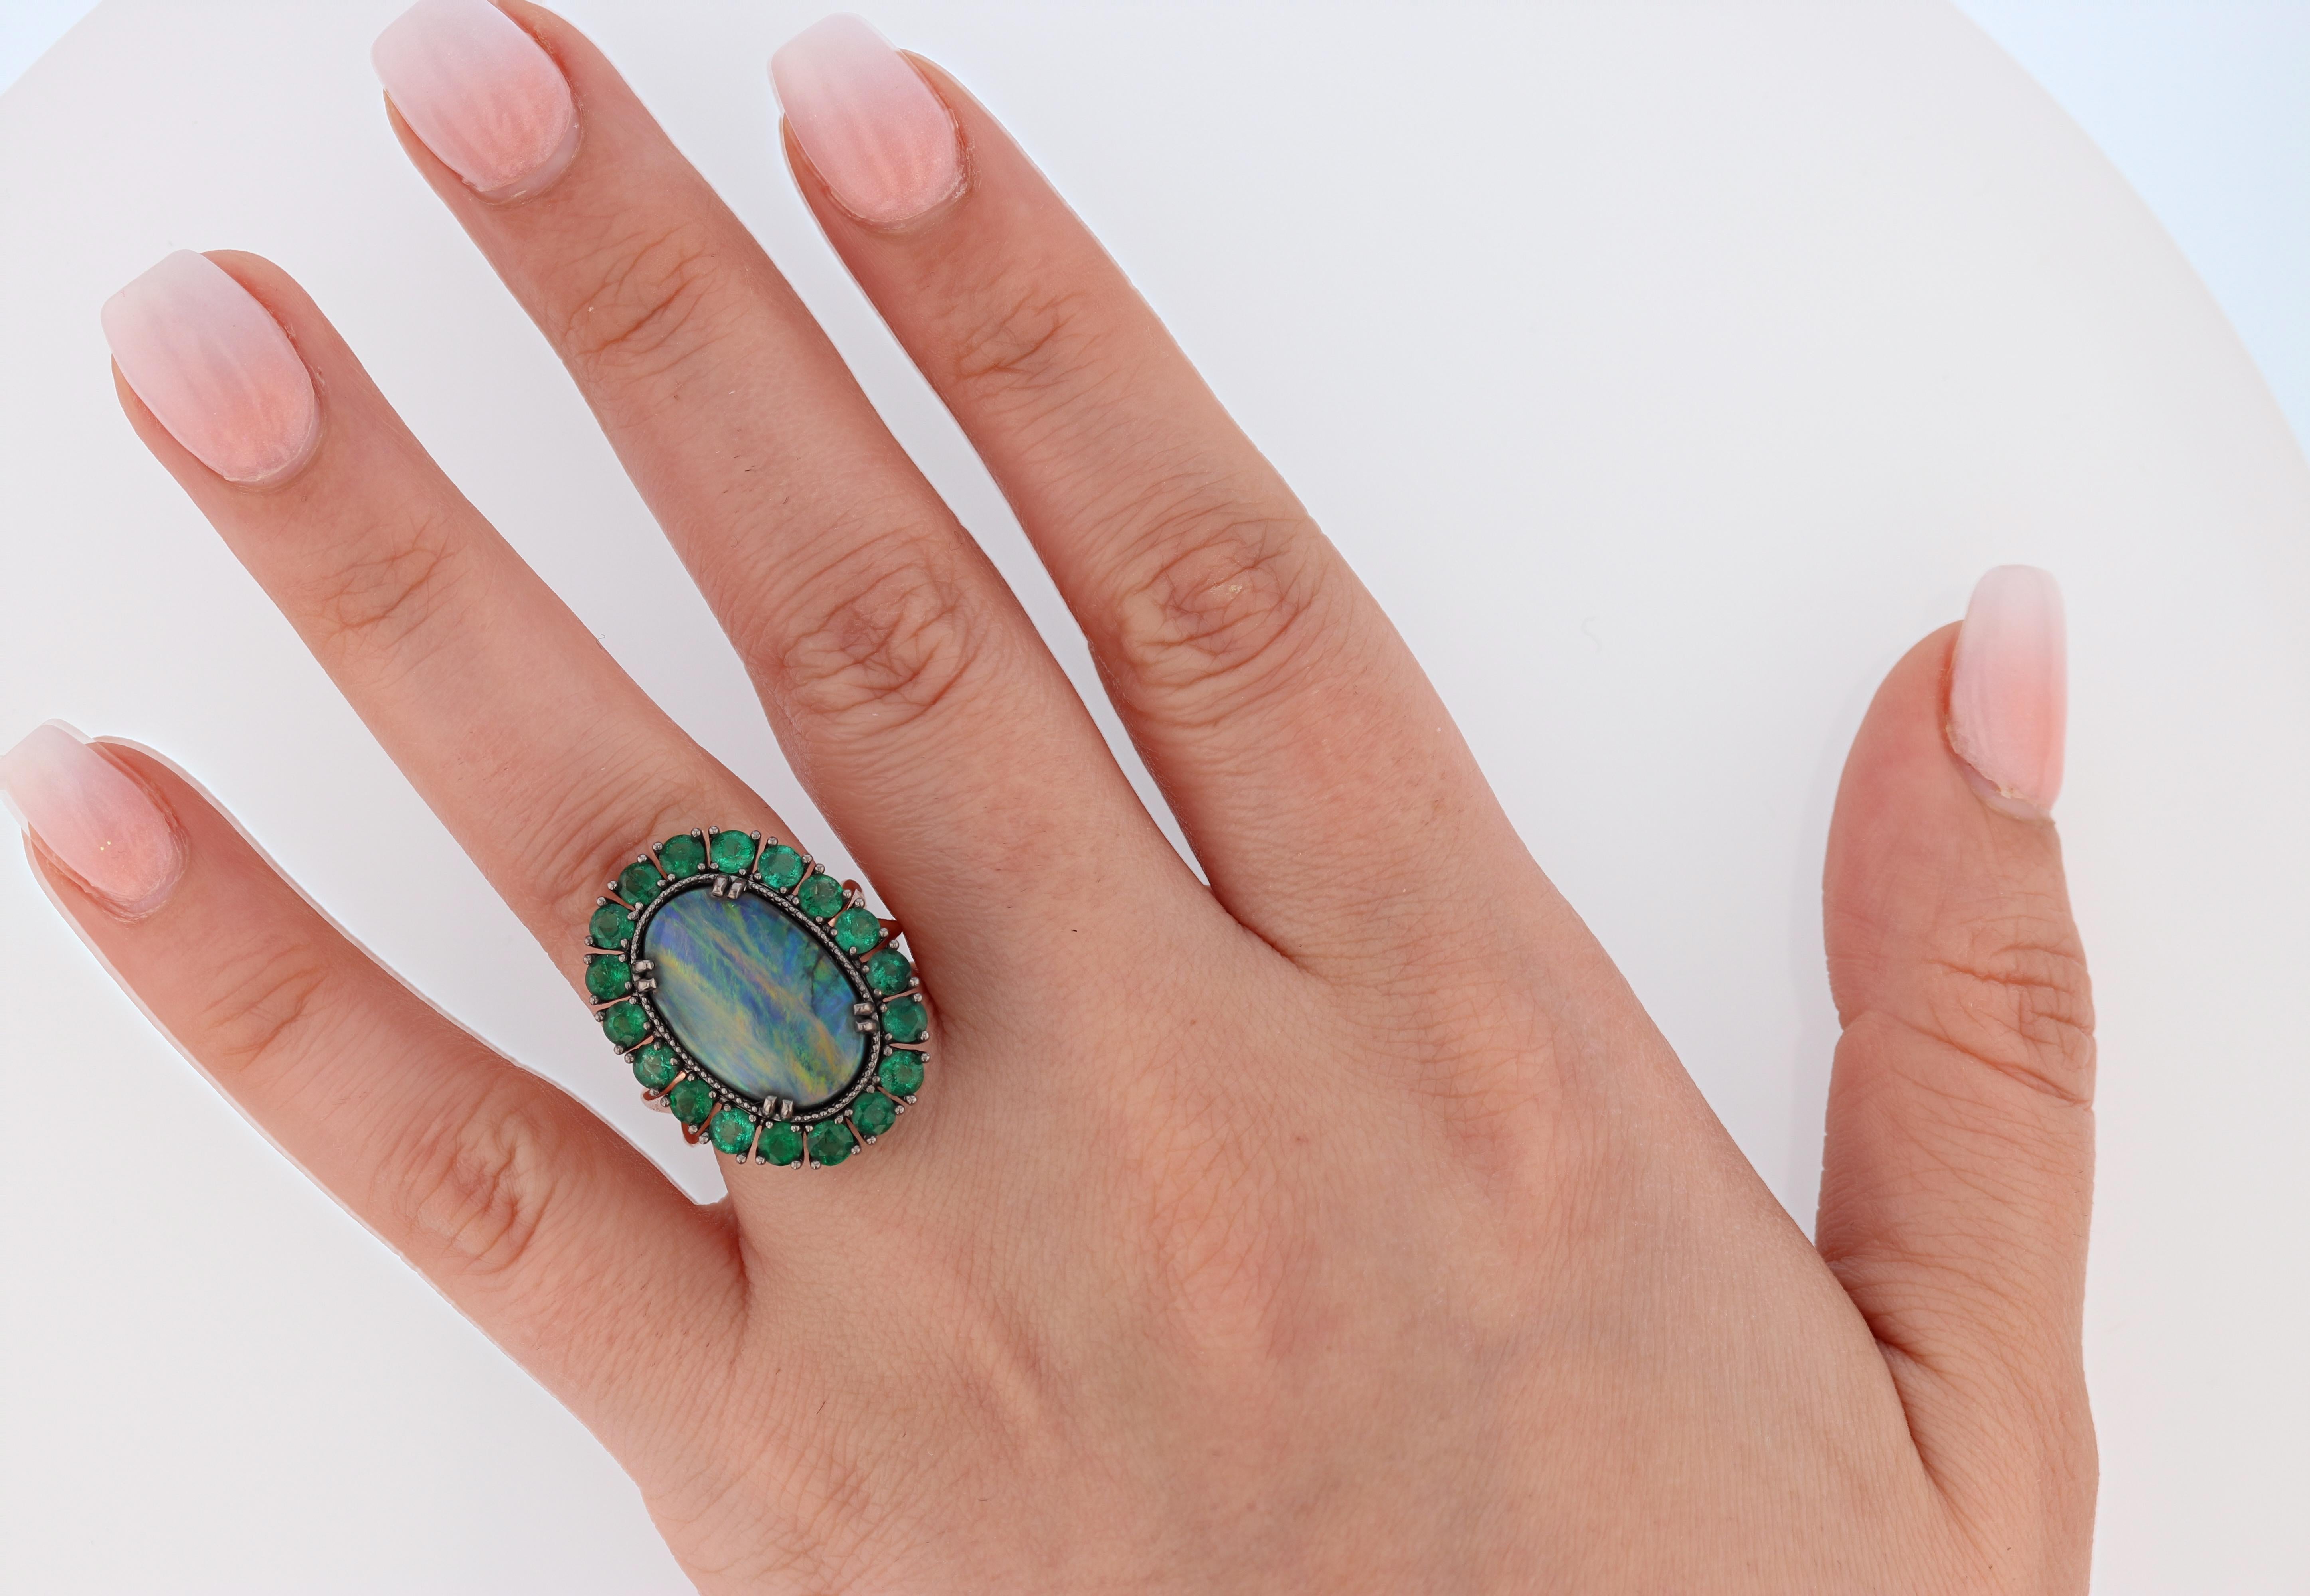 This ring is made with 14 karat rose gold and 14 karat white gold that has a black rhodium finish and features a 4.30ct Australian black opal with a mixture of colors like blue, green, orange and yellow and is surrounded by 18 prong set round cut